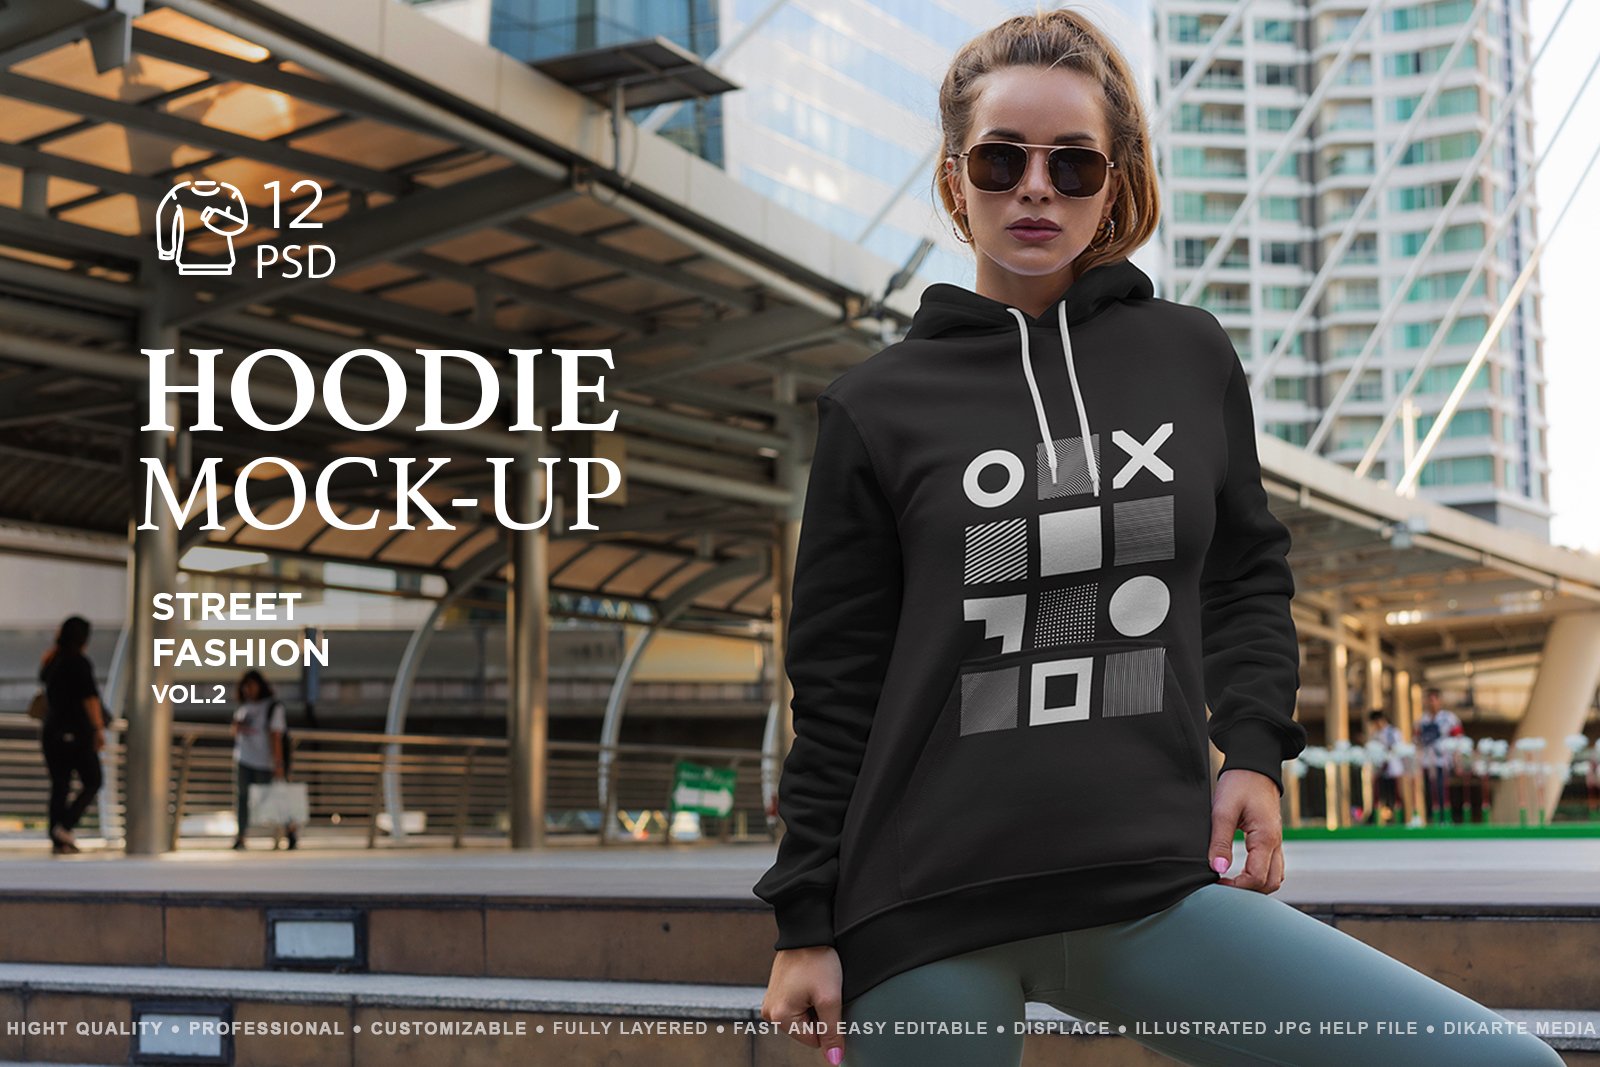 Hoodie Mock-Up Street Fashion vol.2 cover image.